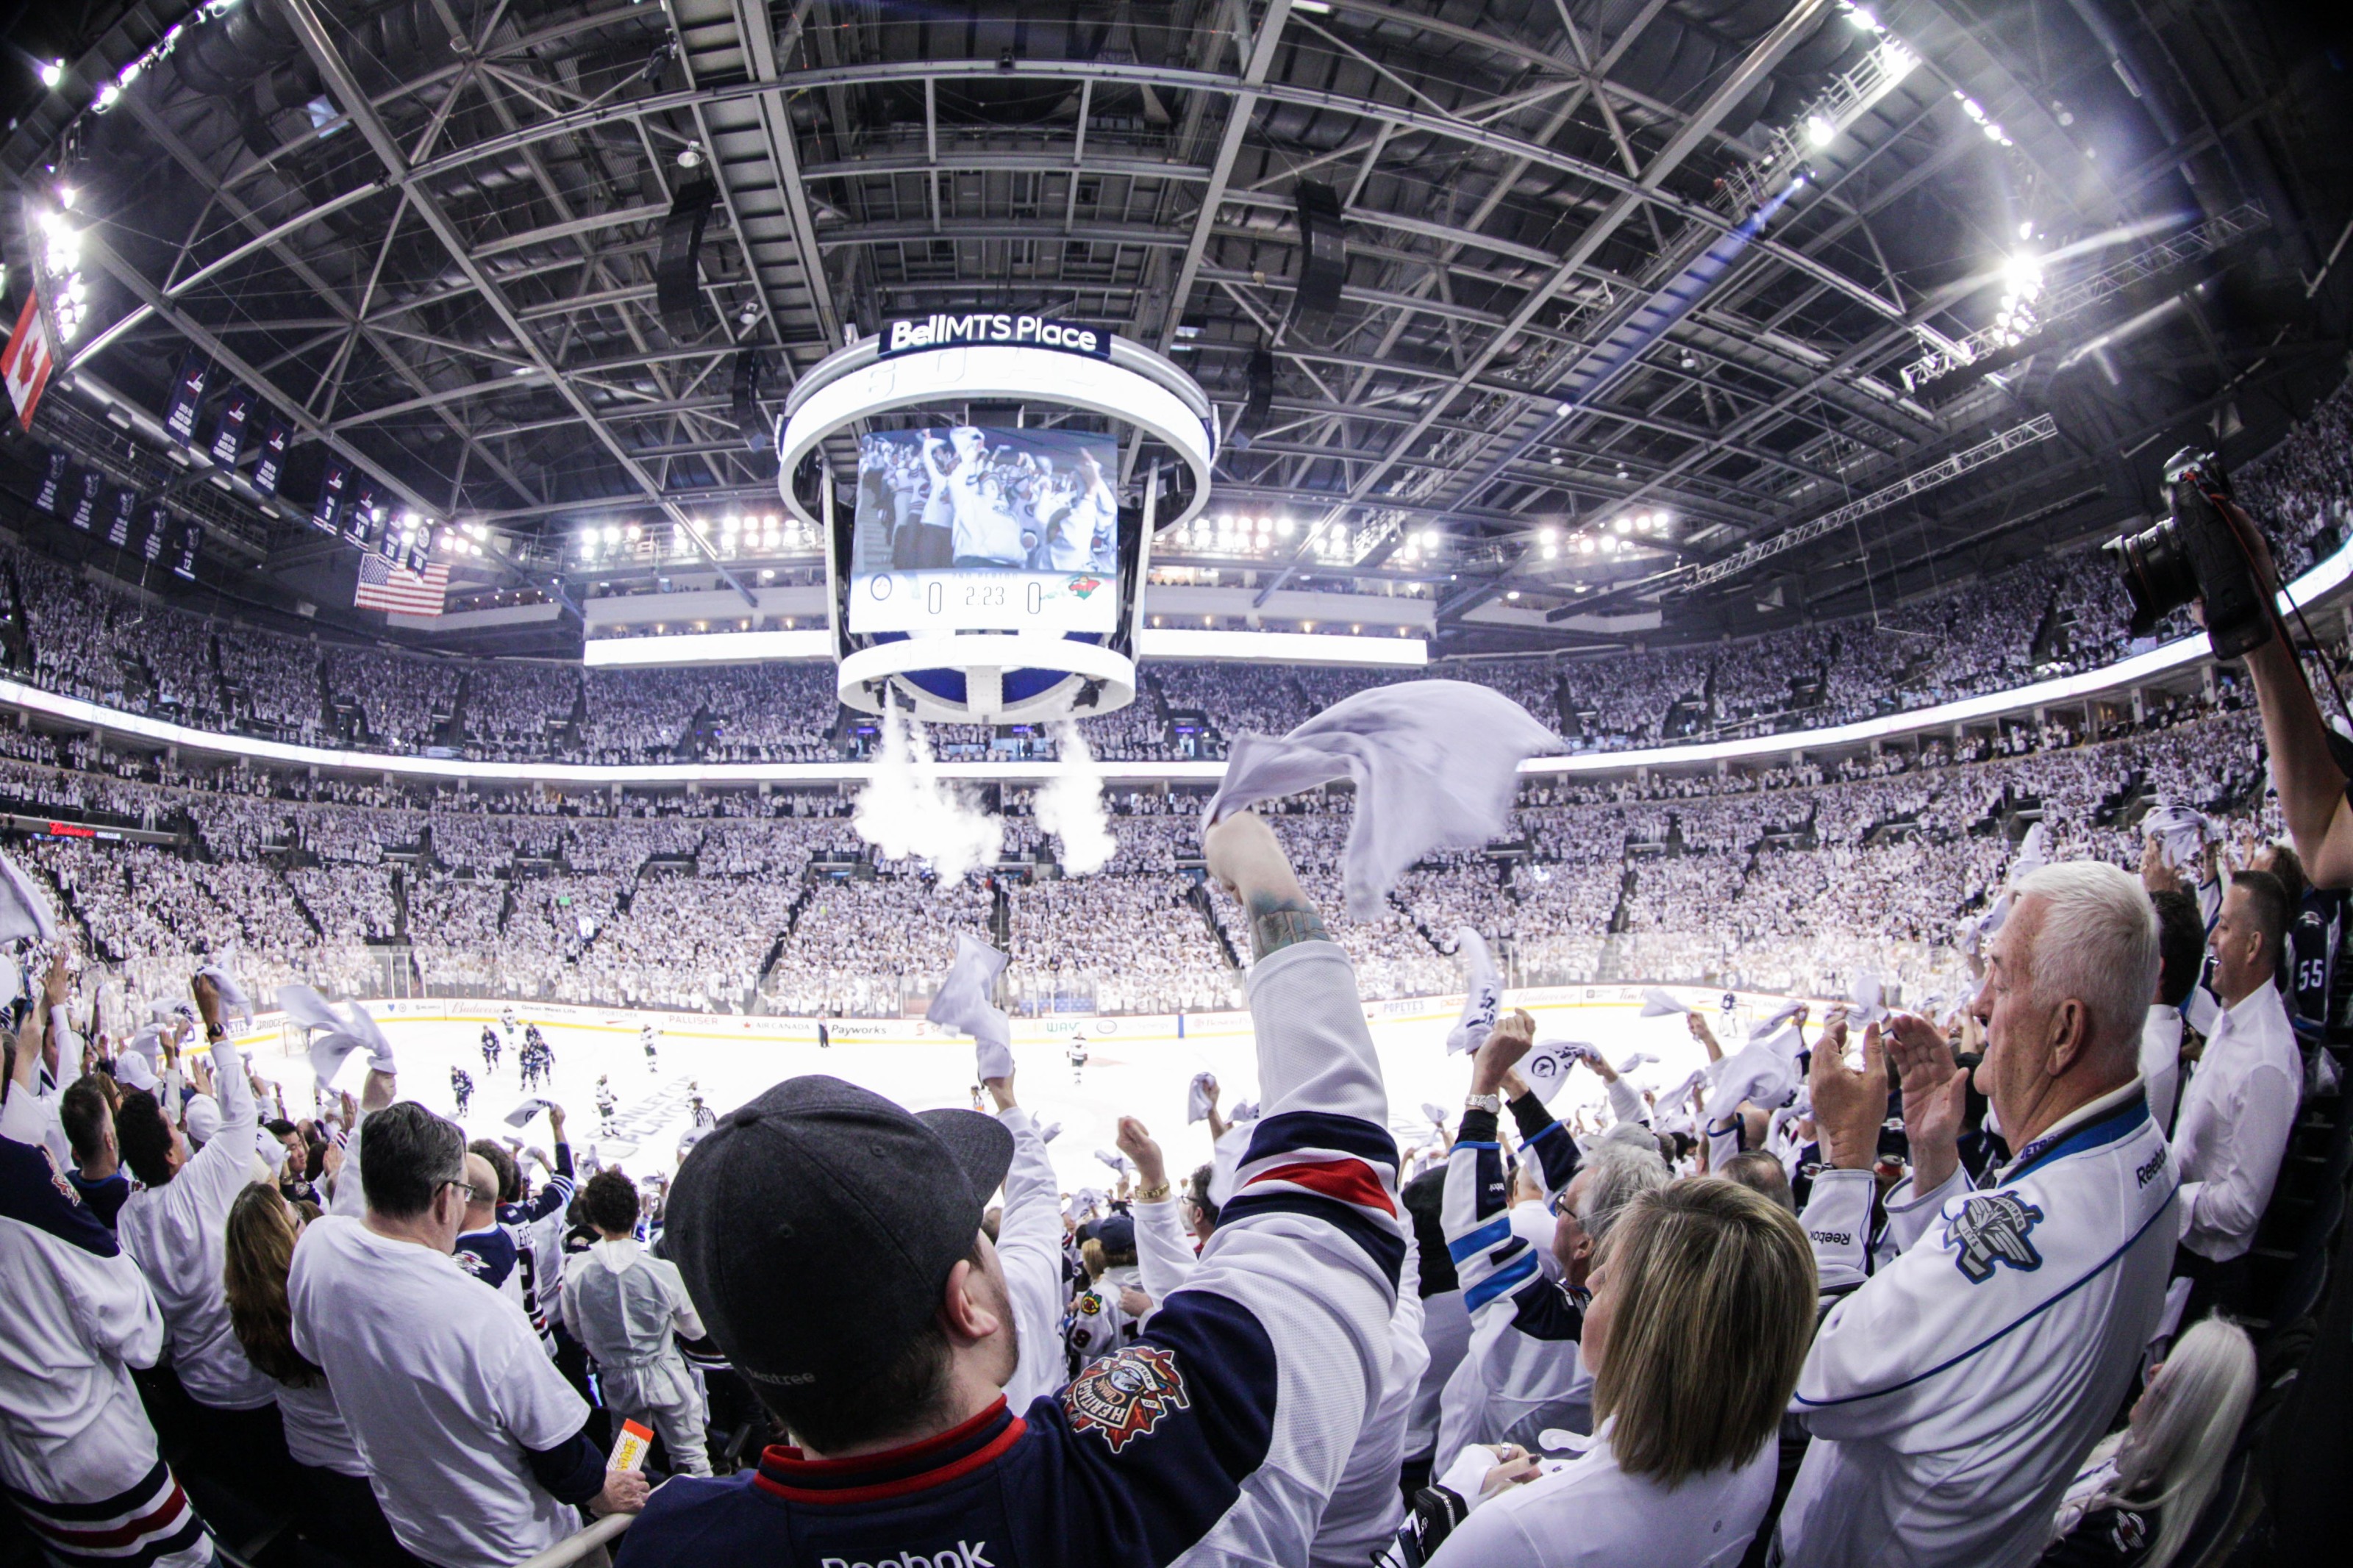 Fans, whiteout tradition leaving impression as Jets look to even playoff  series 